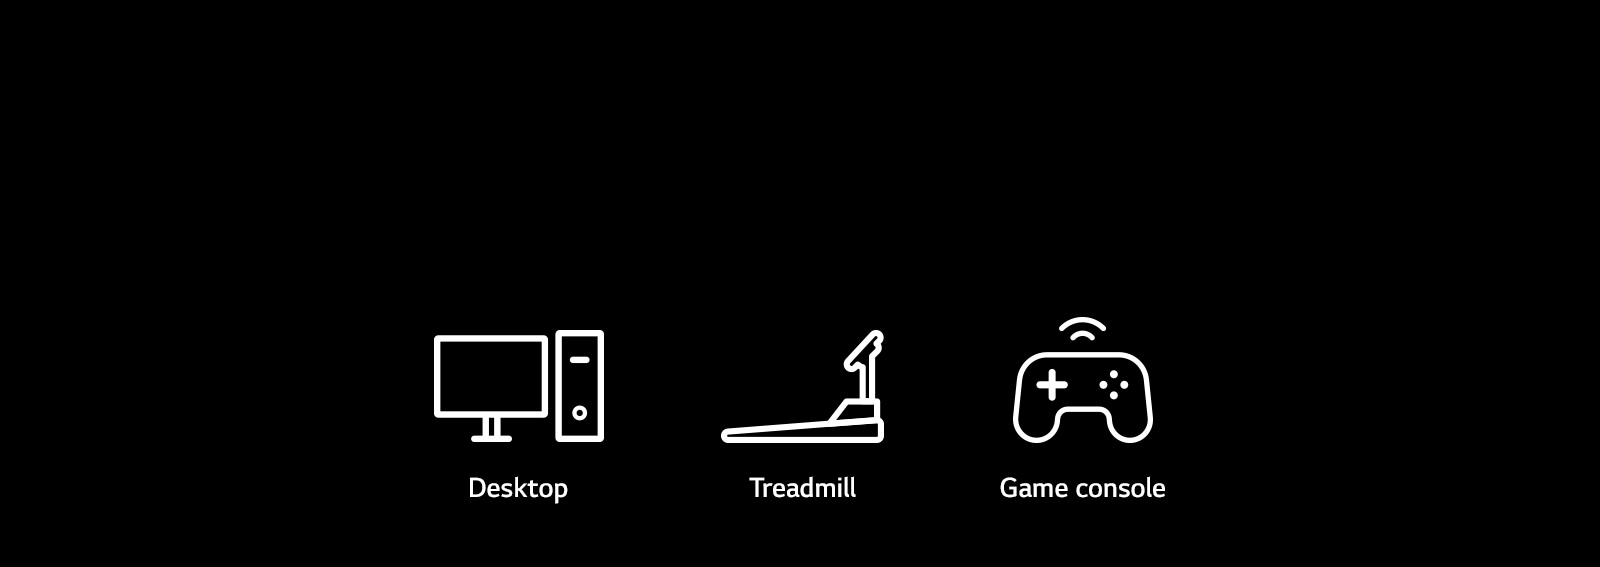 Pictogram images of desktops, treadmills, and game console, which are representative devices that can be implemented with plug & wireless functions.